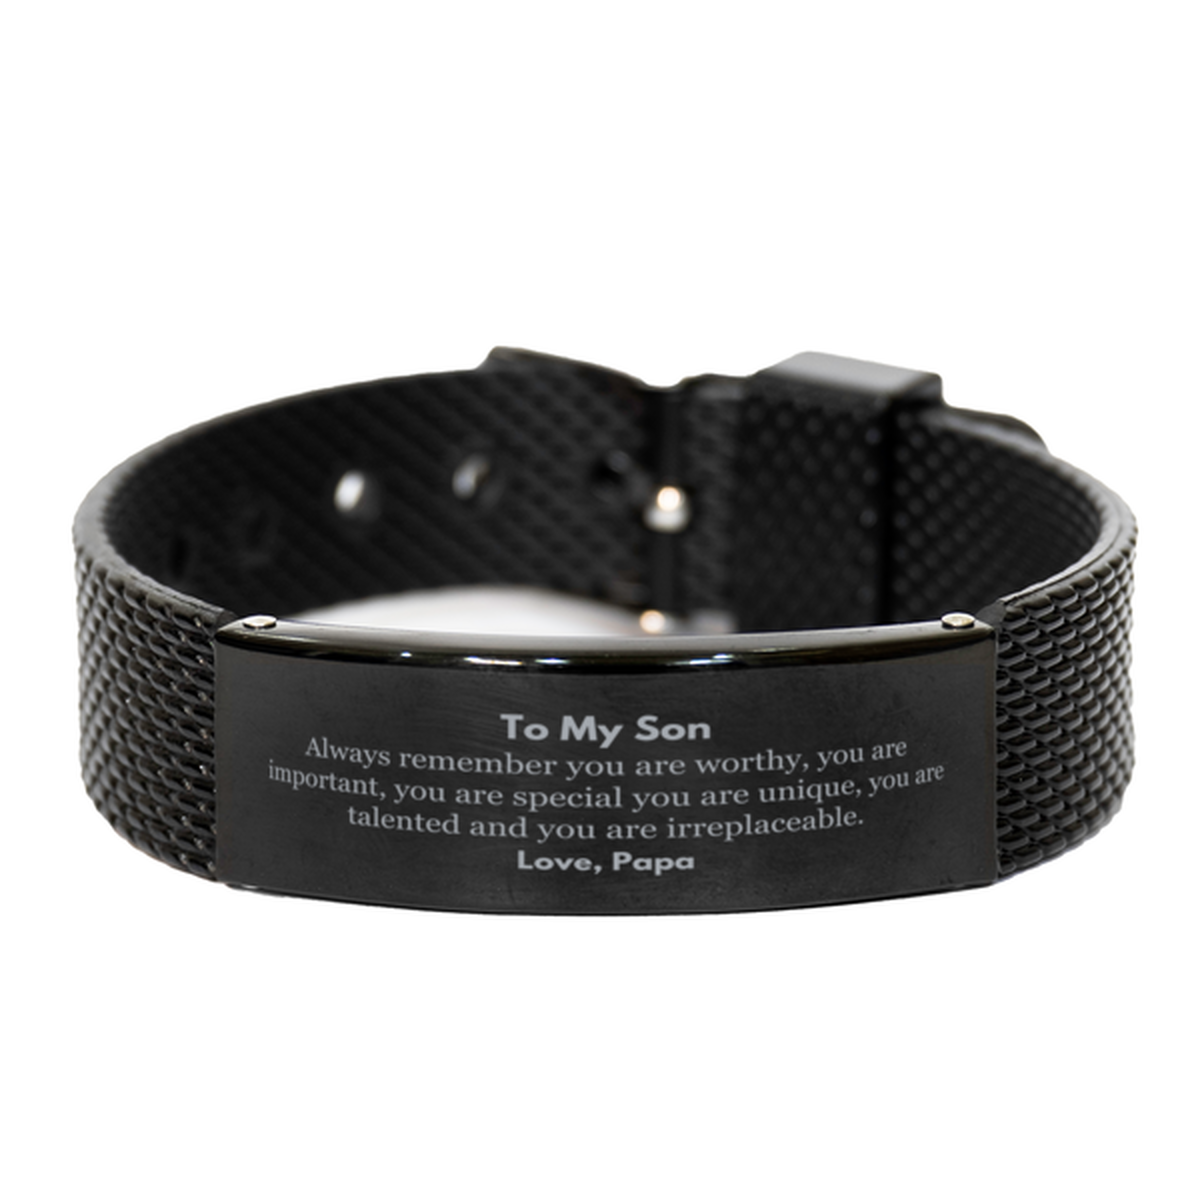 Son Birthday Gifts from Papa, Inspirational Black Shark Mesh Bracelet for Son Christmas Graduation Gifts for Son Always remember you are worthy, you are important. Love, Papa